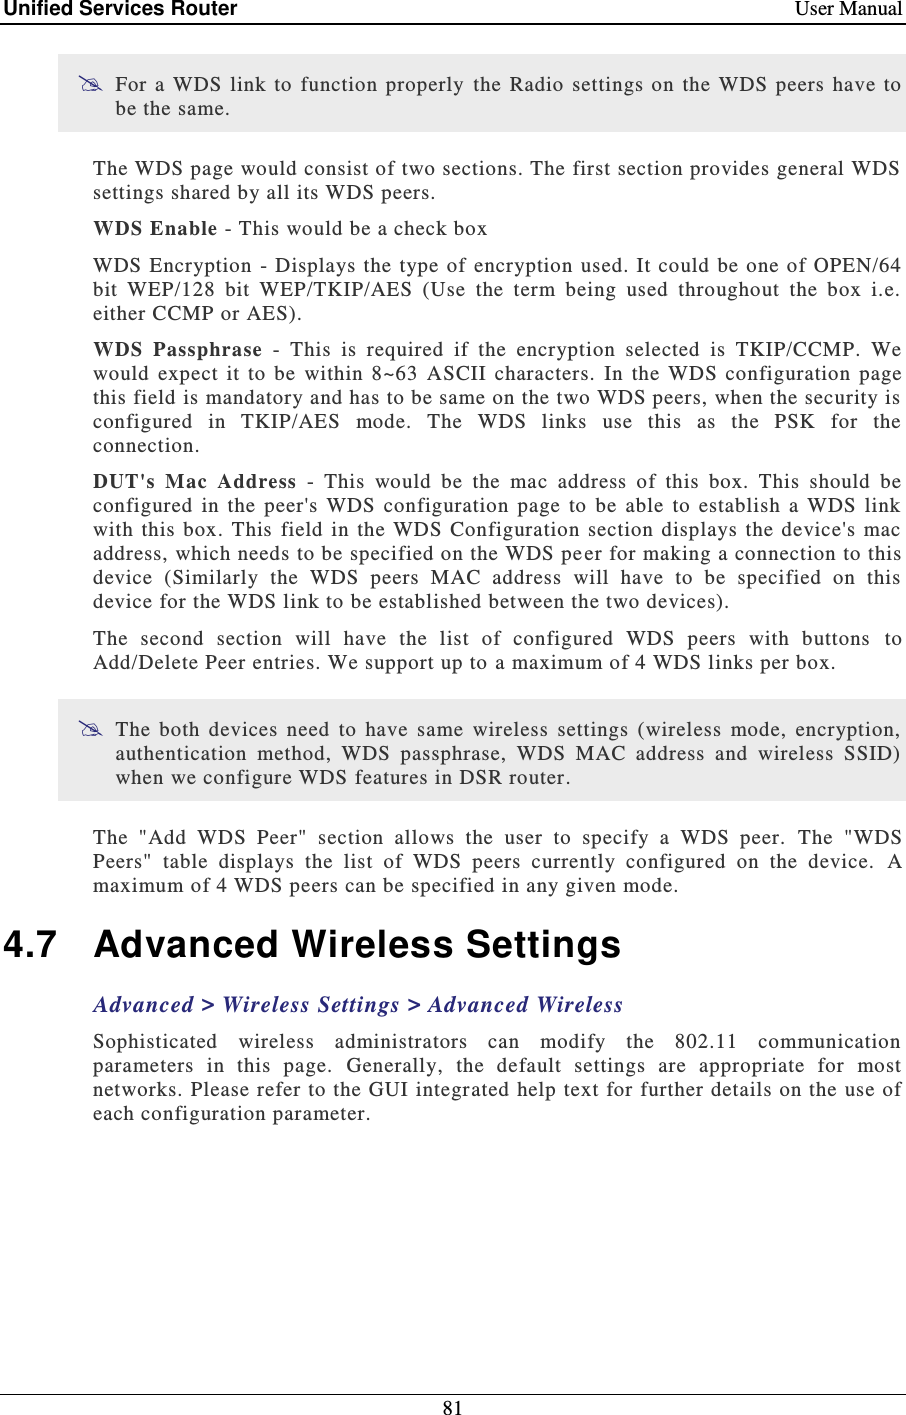 Unified Services Router    User Manual 81   For a WDS  link  to  function  properly  the  Radio  settings  on  the  WDS peers  have  to be the same. The WDS page would consist of two sections. The first section provides general WDS settings shared by all its WDS peers. WDS Enable - This would be a check box WDS Encryption  -  Displays the type  of encryption used. It could be  one of  OPEN/64 bit  WEP/128  bit  WEP/TKIP/AES  (Use  the  term  being  used  throughout  the  box  i.e. either CCMP or AES). WDS  Passphrase  -  This  is  required  if  the  encryption  selected  is  TKIP/CCMP.  We would  expect  it  to  be  within  8~63  ASCII  characters.  In  the  WDS  configuration  page this field is mandatory and has to be same on the two WDS peers, when the security is configured  in  TKIP/AES  mode.  The  WDS  links  use  this  as  the  PSK  for  the connection. DUT&apos;s  Mac  Address  -  This  would  be  the  mac  address  of  this  box.  This  should  be configured  in  the  peer&apos;s  WDS  configuration  page  to  be  able  to  establish  a  WDS  link with  this box. This field in  the  WDS  Configuration section displays the device&apos;s  mac address, which needs to be specified on the WDS pe er for making a connection to this device  (Similarly  the  WDS  peers  MAC  address  will  have  to  be  specified  on  this device for the WDS link to be established between the two devices).  The  second  section  will  have  the  list  of  configured  WDS  peers  with  buttons  to Add/Delete Peer entries. We support up to a maximum of 4 WDS links per box.  The  both  devices  need  to  have  same  wireless  settings  (wireless  mode,  encryption, authentication  method,  WDS  passphrase,  WDS  MAC  address  and  wireless  SSID) when we configure WDS features in DSR router. The  &quot;Add  WDS  Peer&quot;  section  allows  the  user  to  specify  a  WDS  peer.   The  &quot;WDS Peers&quot;  table  displays  the  list  of  WDS  peers  currently  configured  on  the  device.   A maximum of 4 WDS peers can be specified in any given mode.  4.7  Advanced Wireless Settings Advanced &gt; Wireless Settings &gt; Advanced Wireless Sophisticated  wireless  administrators  can  modify  the  802.11  communication parameters  in  this  page.  Generally,  the  default  settings  are  appropriate  for  most networks. Please refer to the GUI integrated help text for further details on the use of each configuration parameter.  